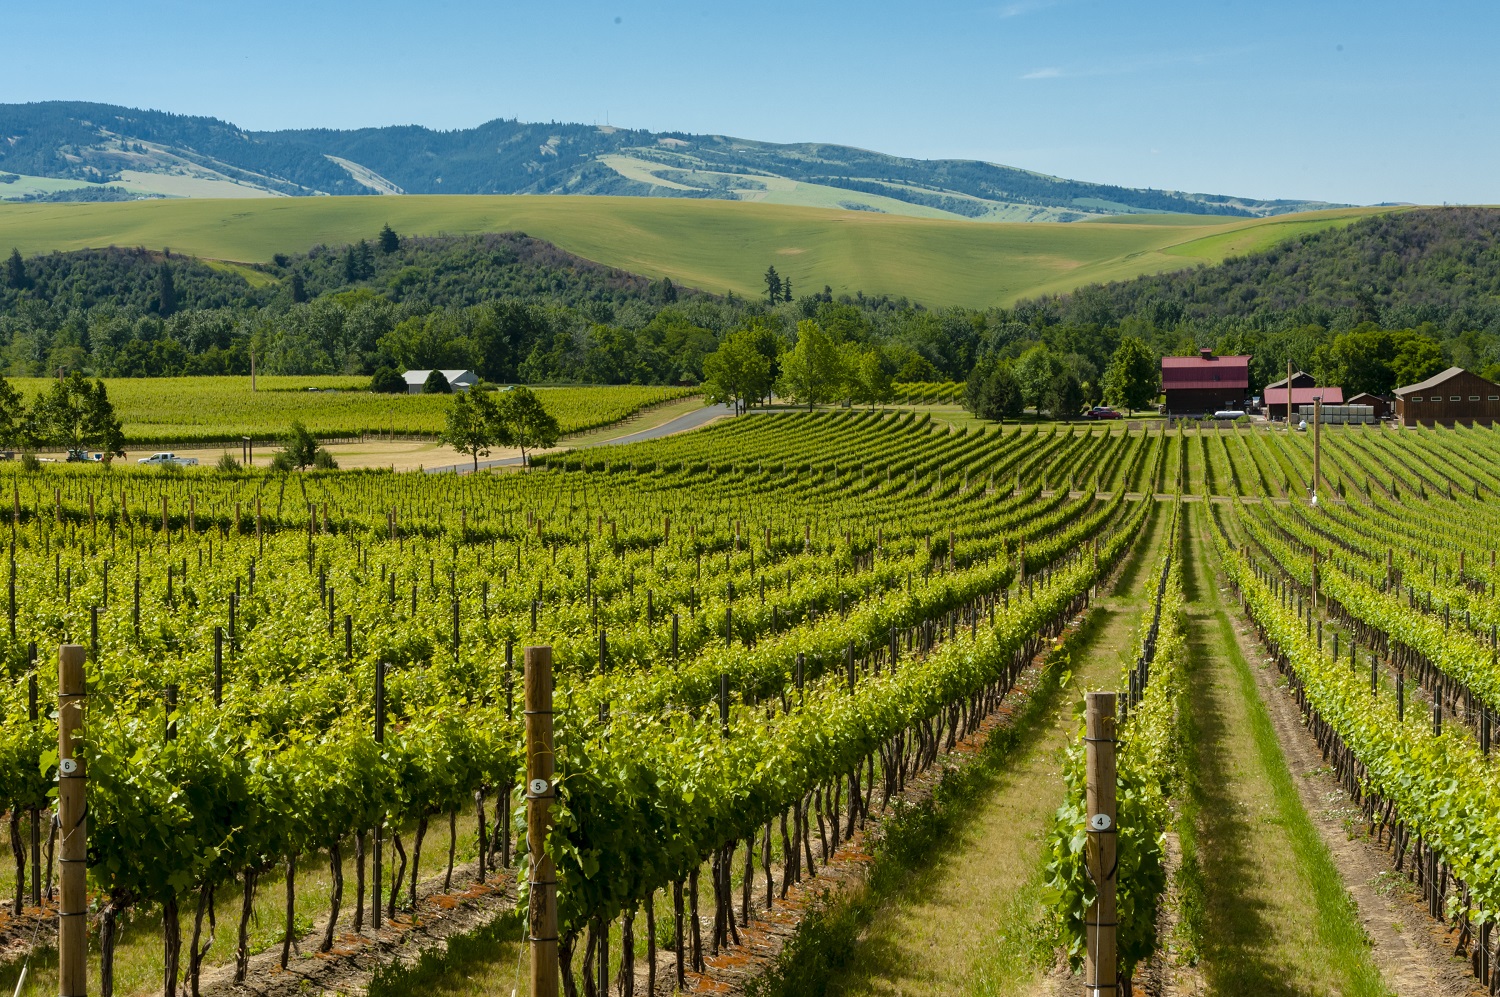 Visit: Walla Walla Valley & the Rocks District of Milton-Freewater